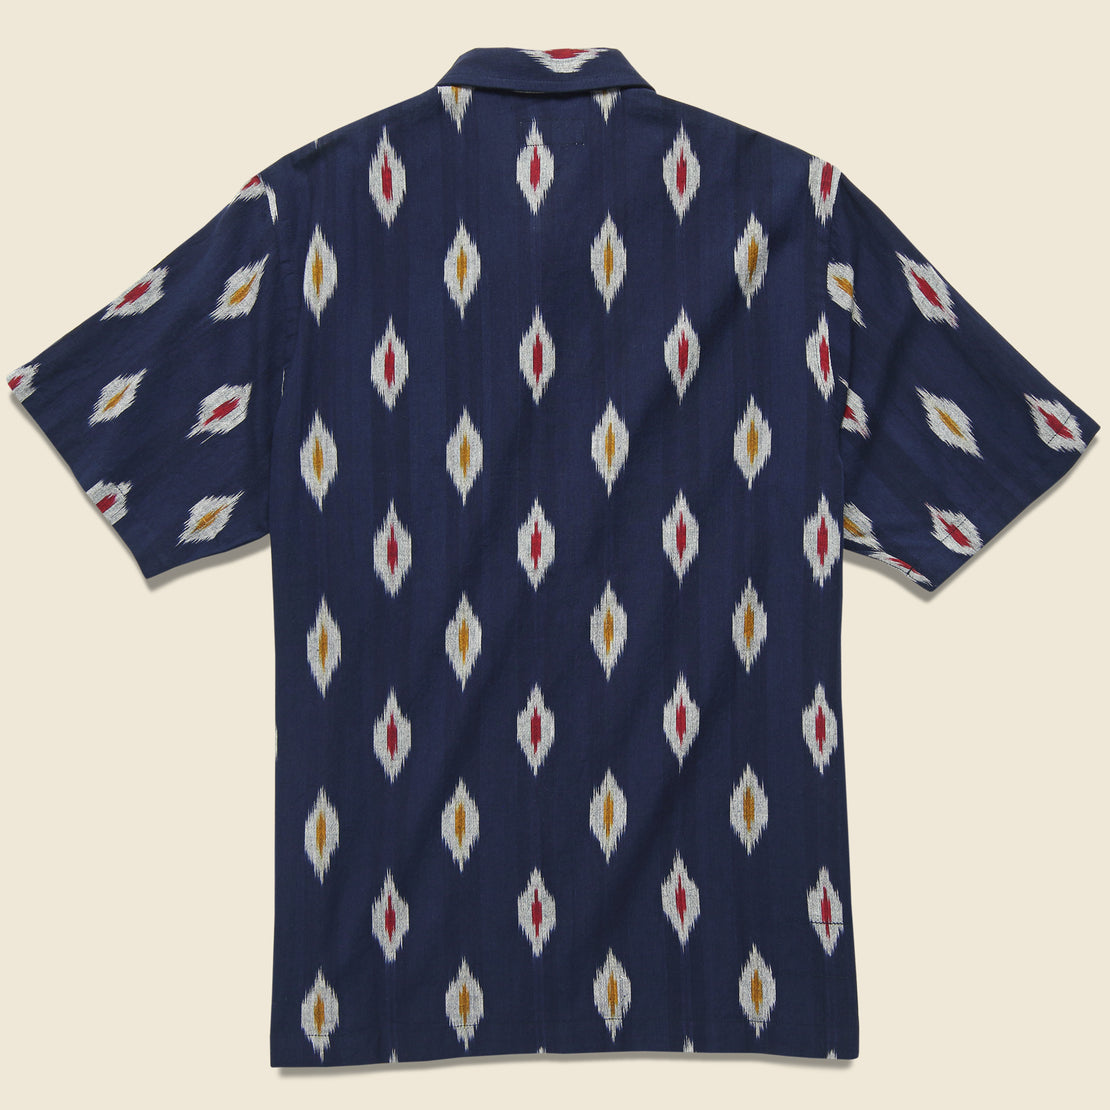 Road Shirt - Indigo Ikat - Universal Works - STAG Provisions - Tops - S/S Woven - Other Pattern